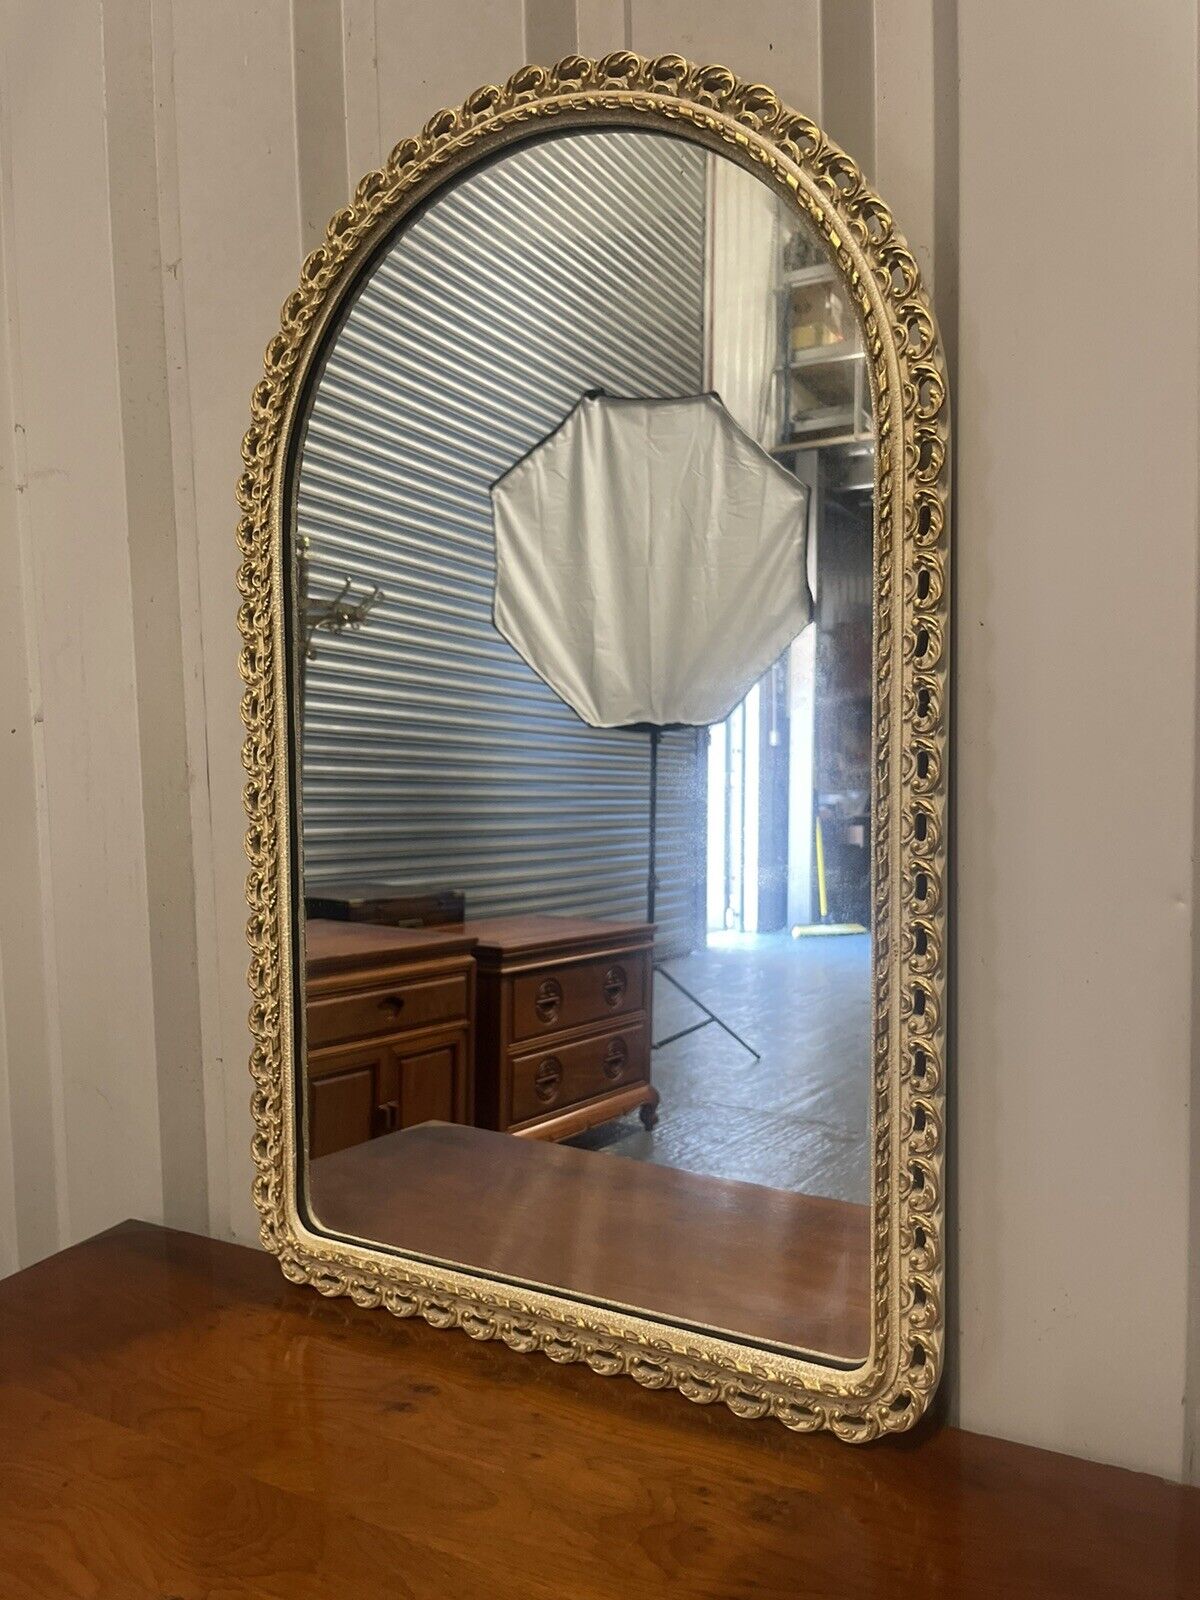 Antiques of London are delighted to offer for sale this Lovely Vintage Wall Mirror Cream Coloured and Gold Gilt-wood

Please carefully look at the pictures to see the condition before purchasing, as they form part of the description.